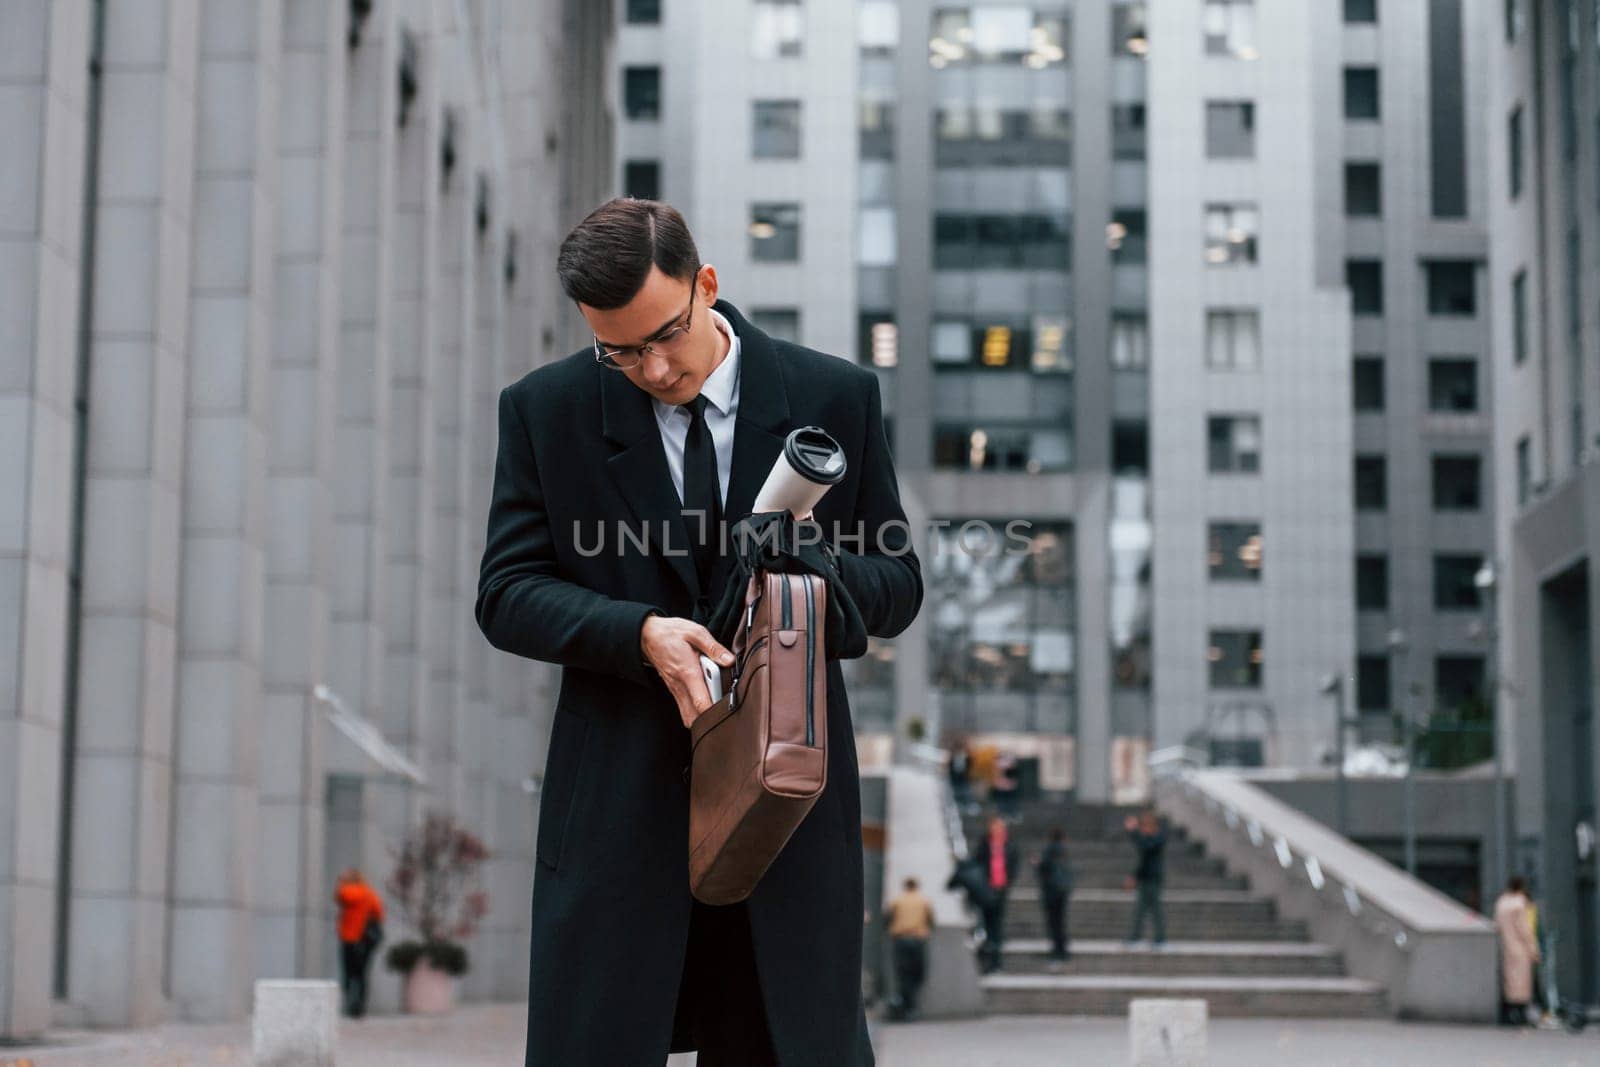 Putting phone in bag. Businessman in black suit and tie is outdoors in the city.